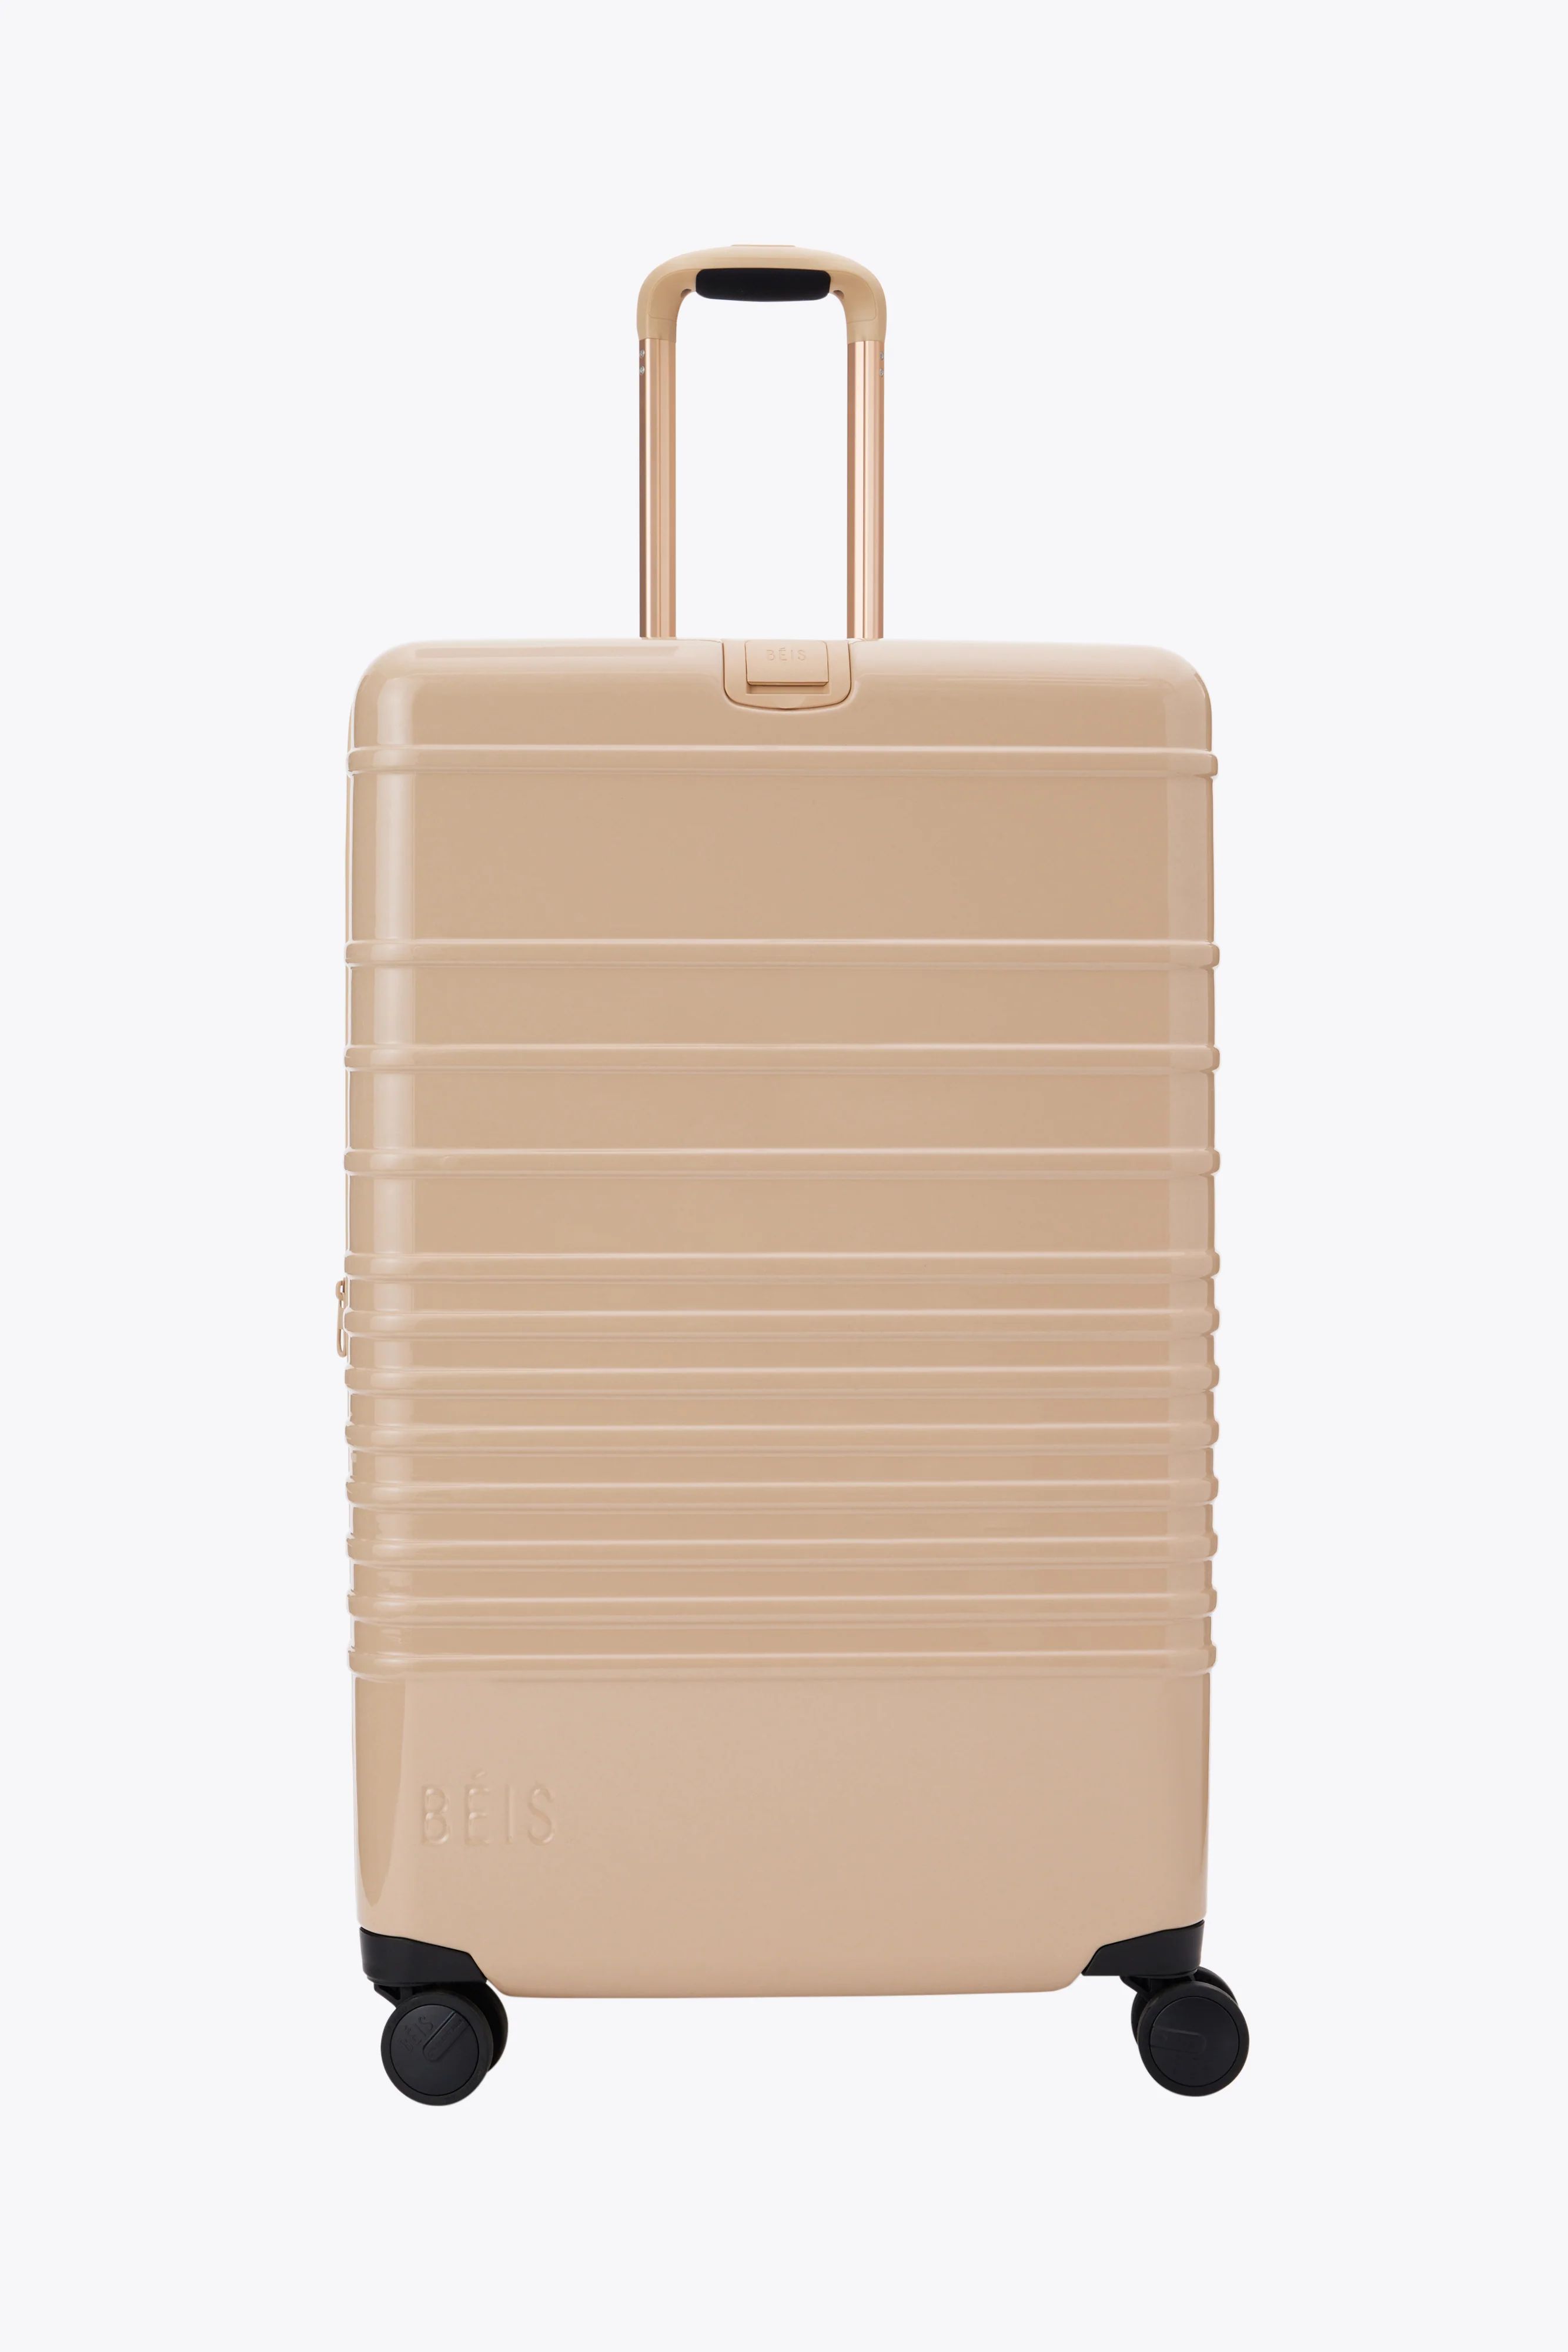 Carry-OnMedium Check-InLarge Check-In | BÉIS Travel